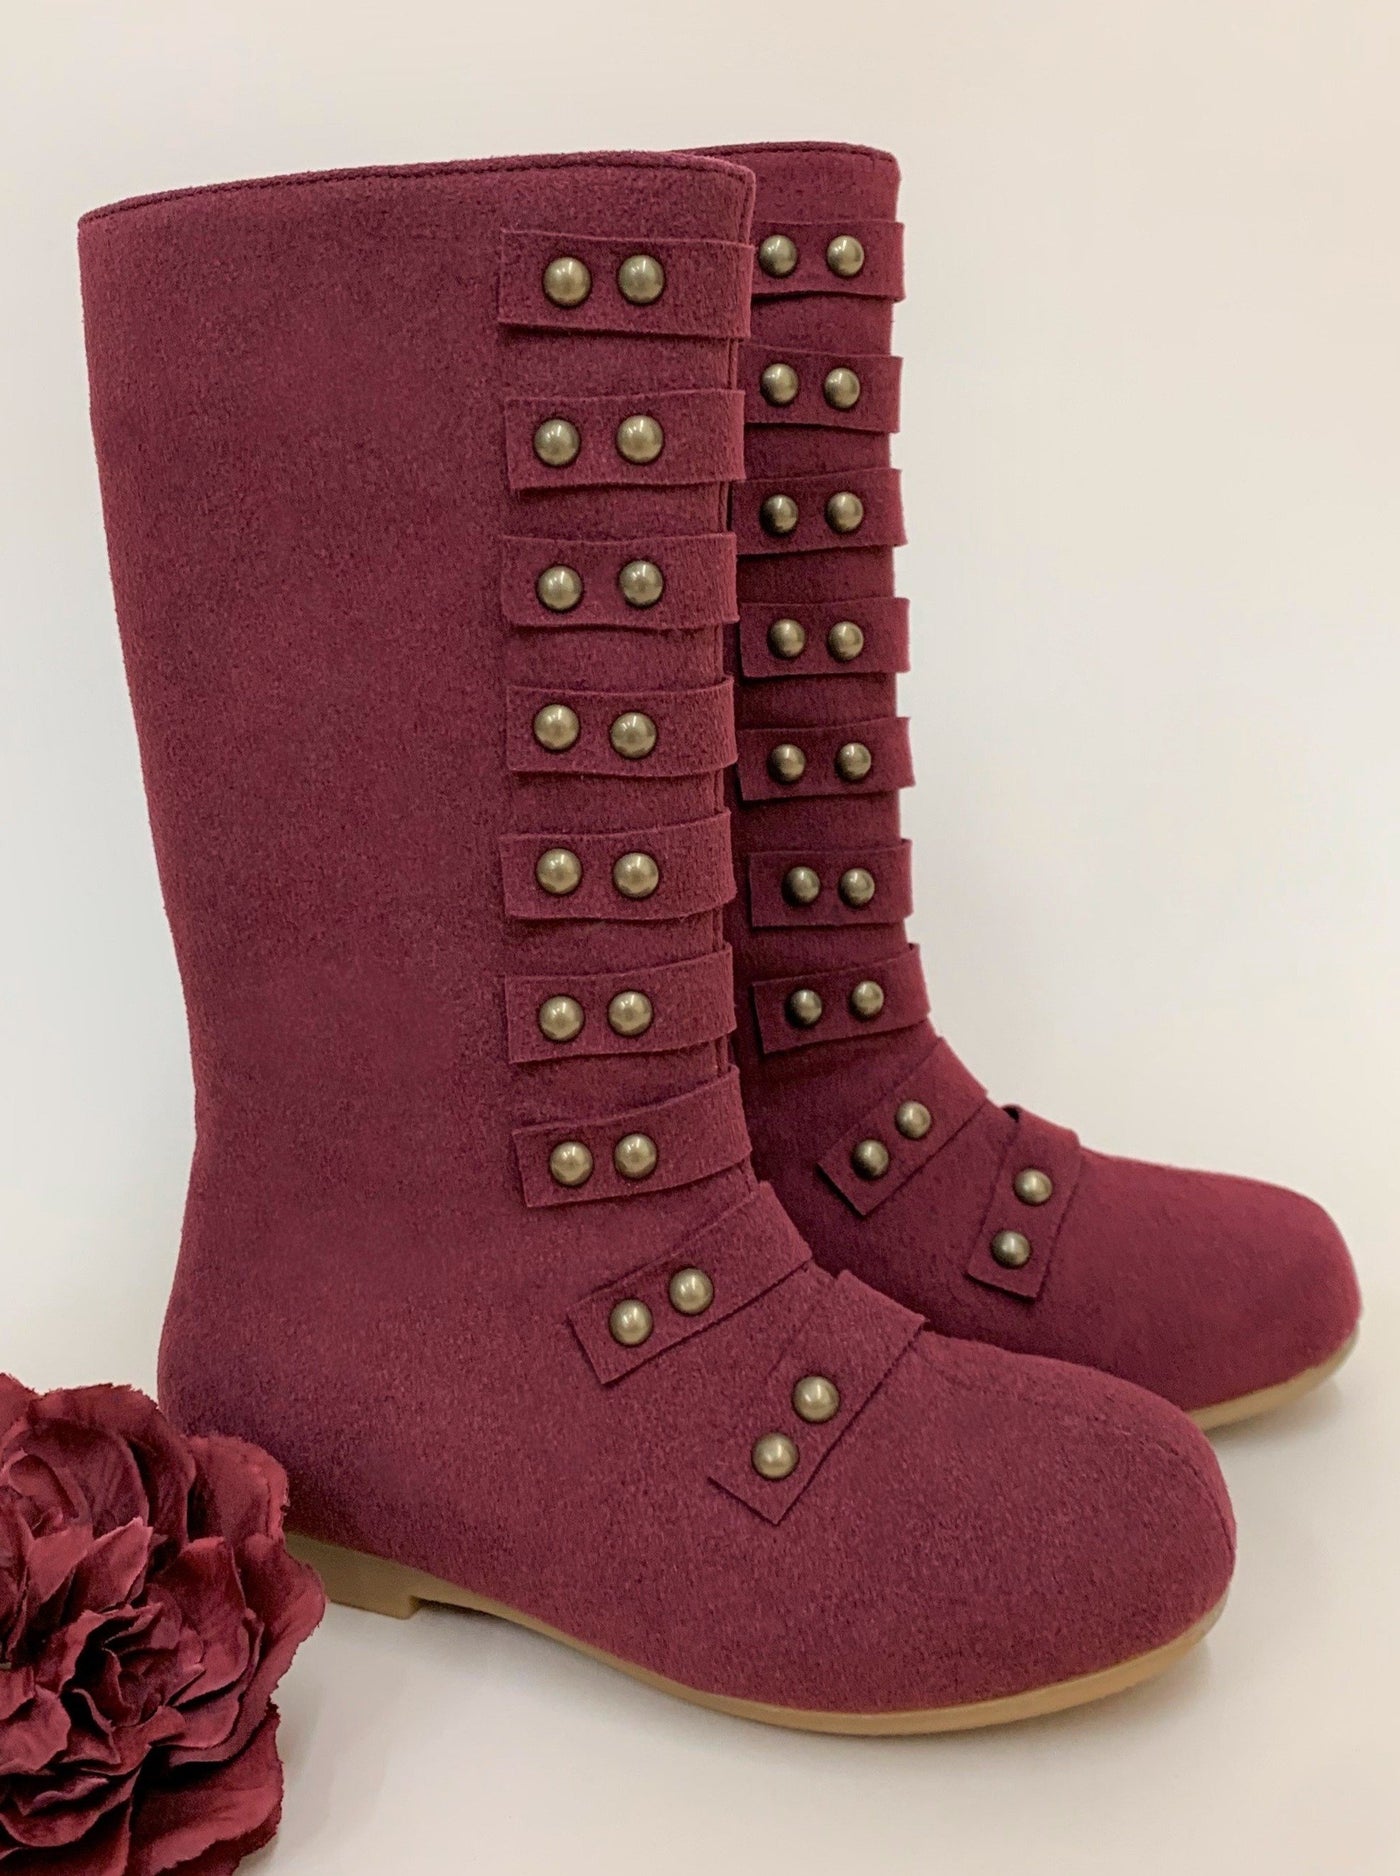 Mia Belle Girls Red Military Style Boots | Shoes By Liv and Mia